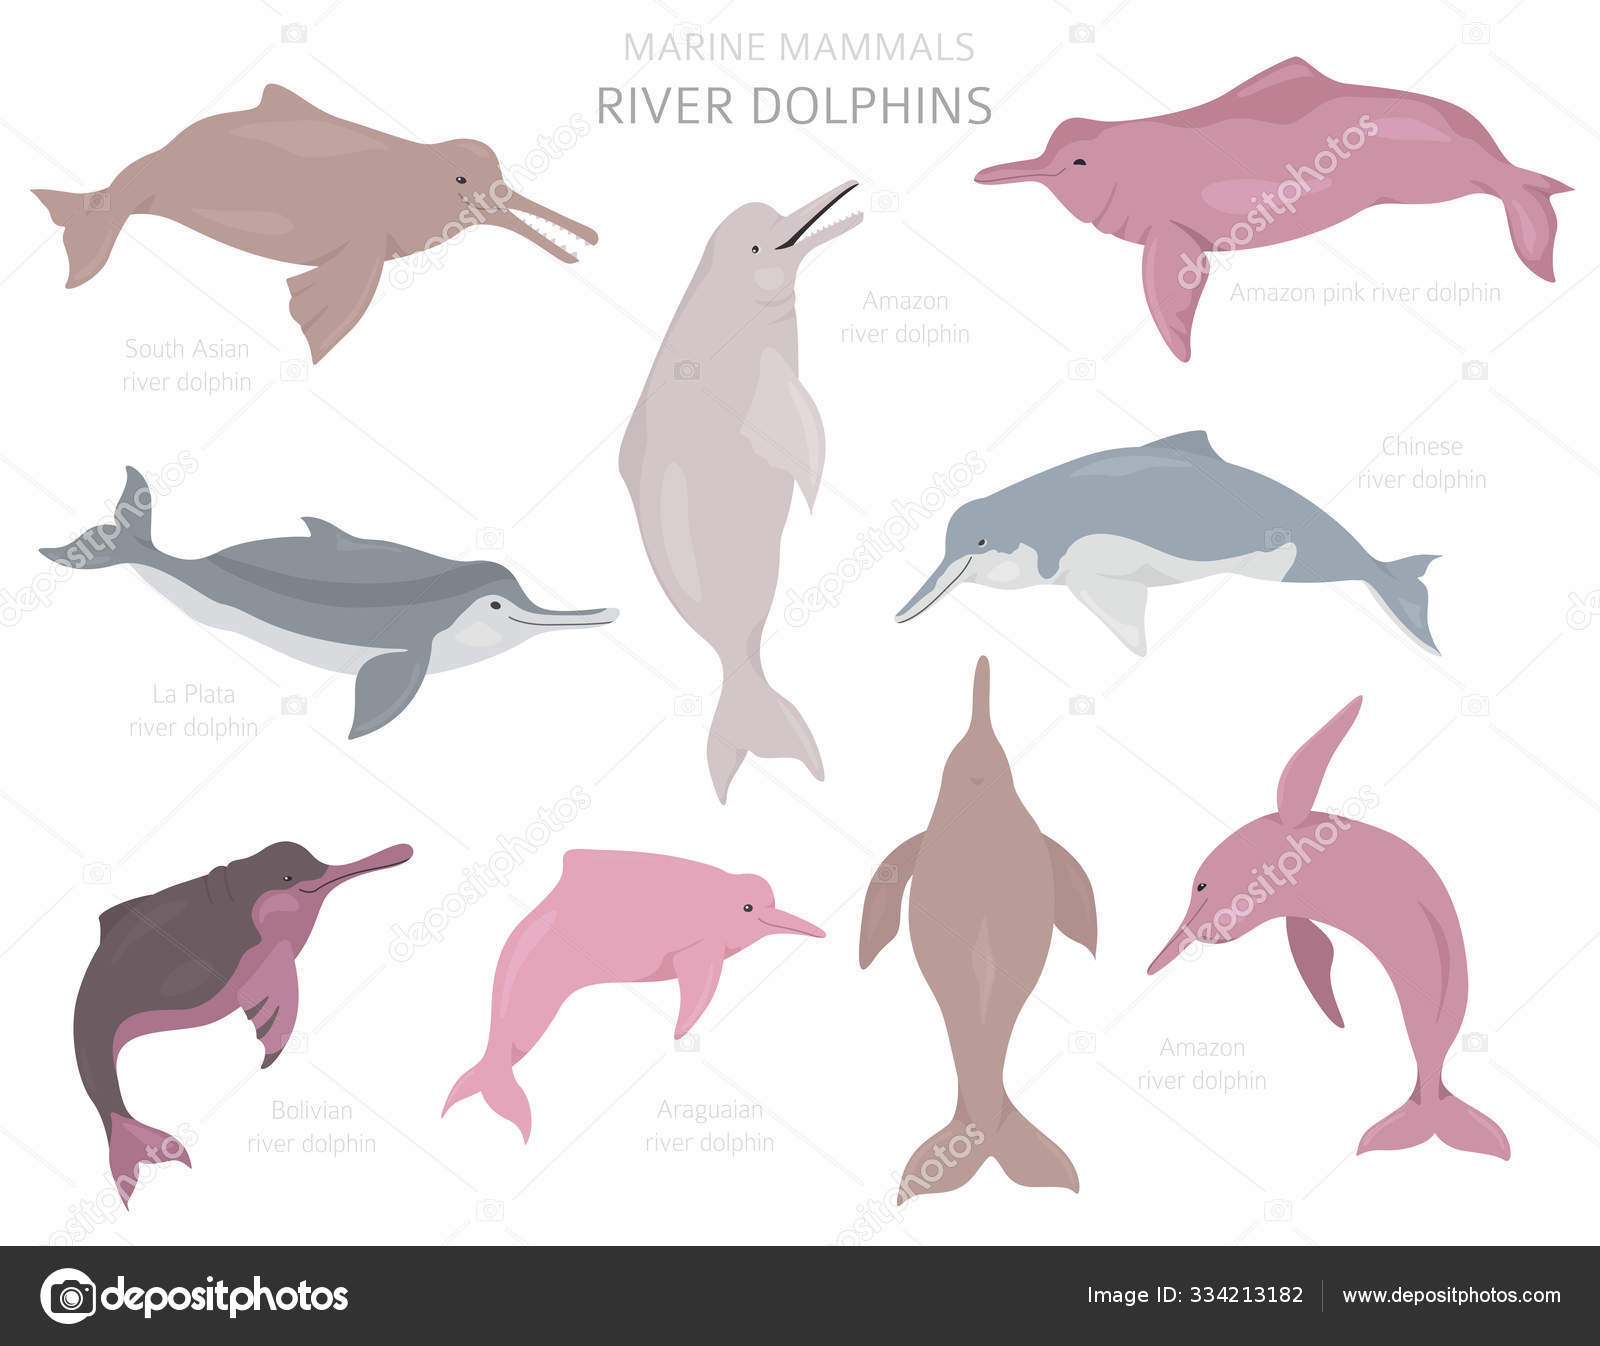 75 Amazon River Dolphin Vector Images Free Royalty Free Amazon River Dolphin Vectors Depositphotos